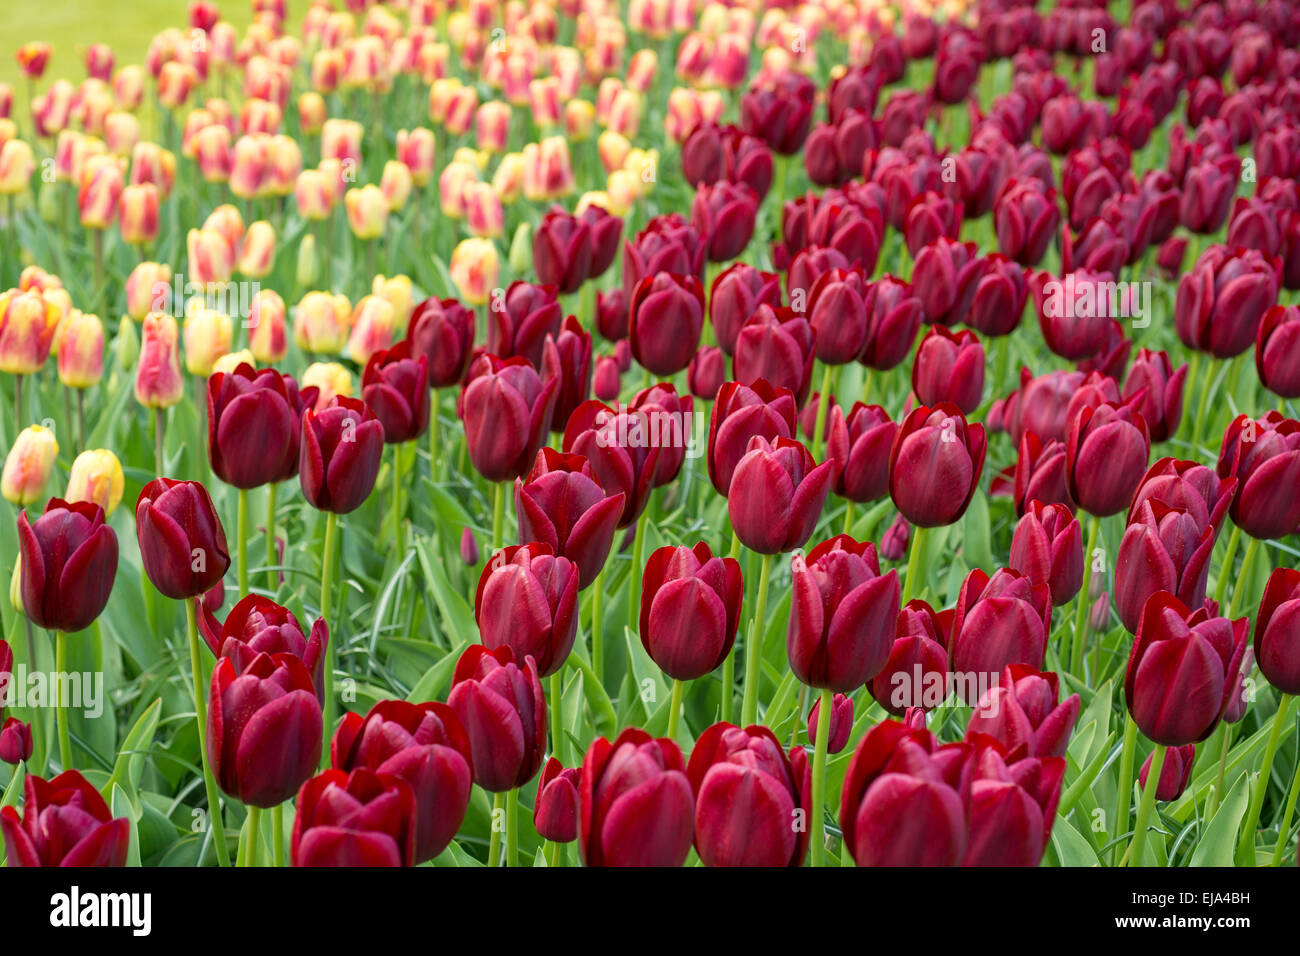 Bedding of colorful spring flowers, Colorful bedded spring flower arrangement with burgundy red tulips (Tulipa) Stock Photo